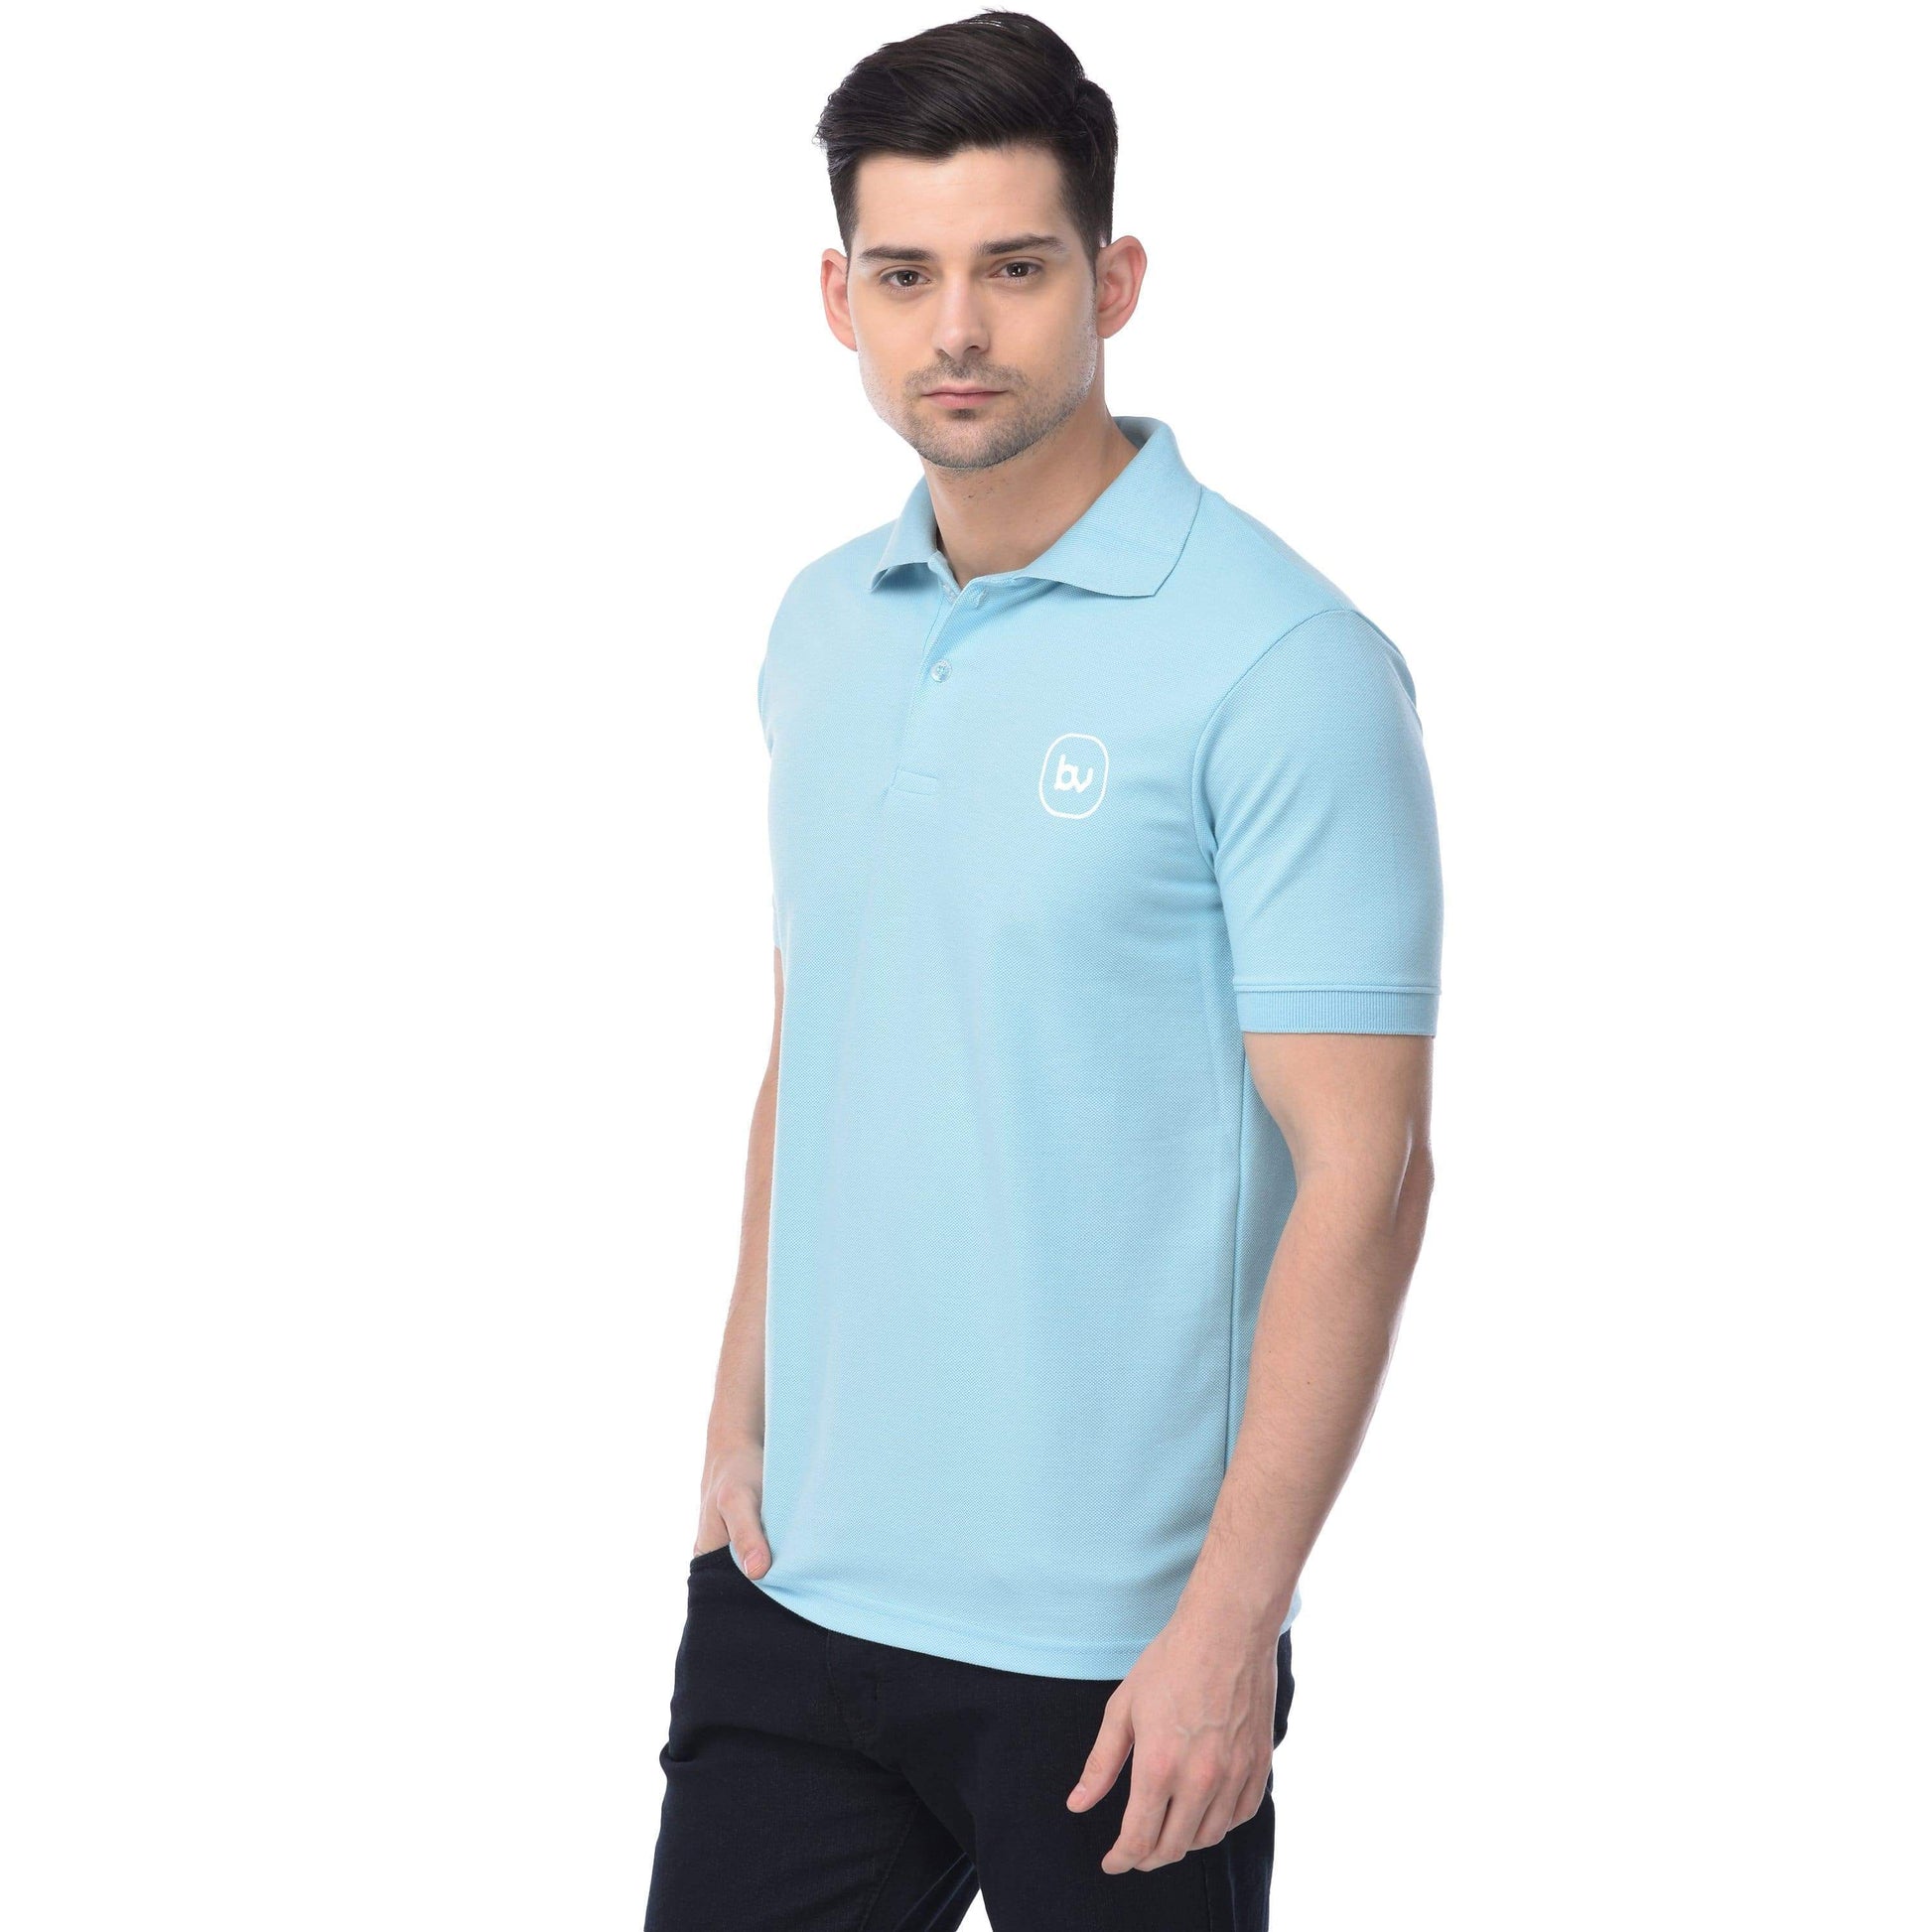 Bazarville Void POLO S / UNISEX Baby Blue Polo